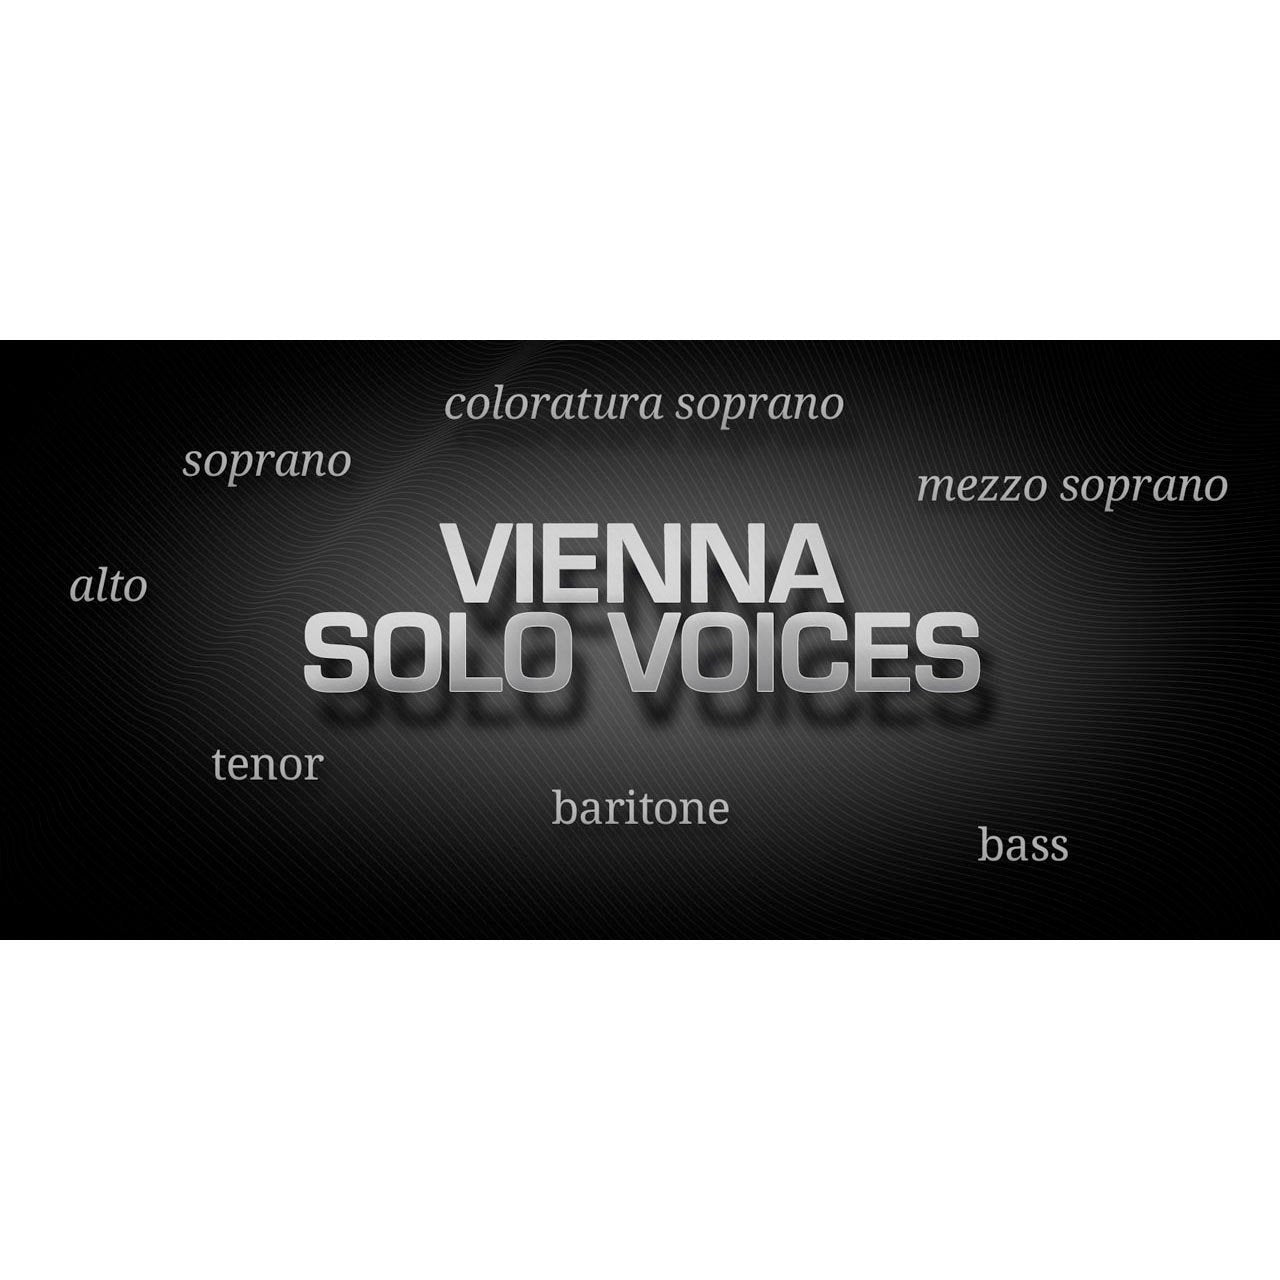 Software Instruments - Vienna Symphonic Library VSL - VIENNA SOLO VOICES